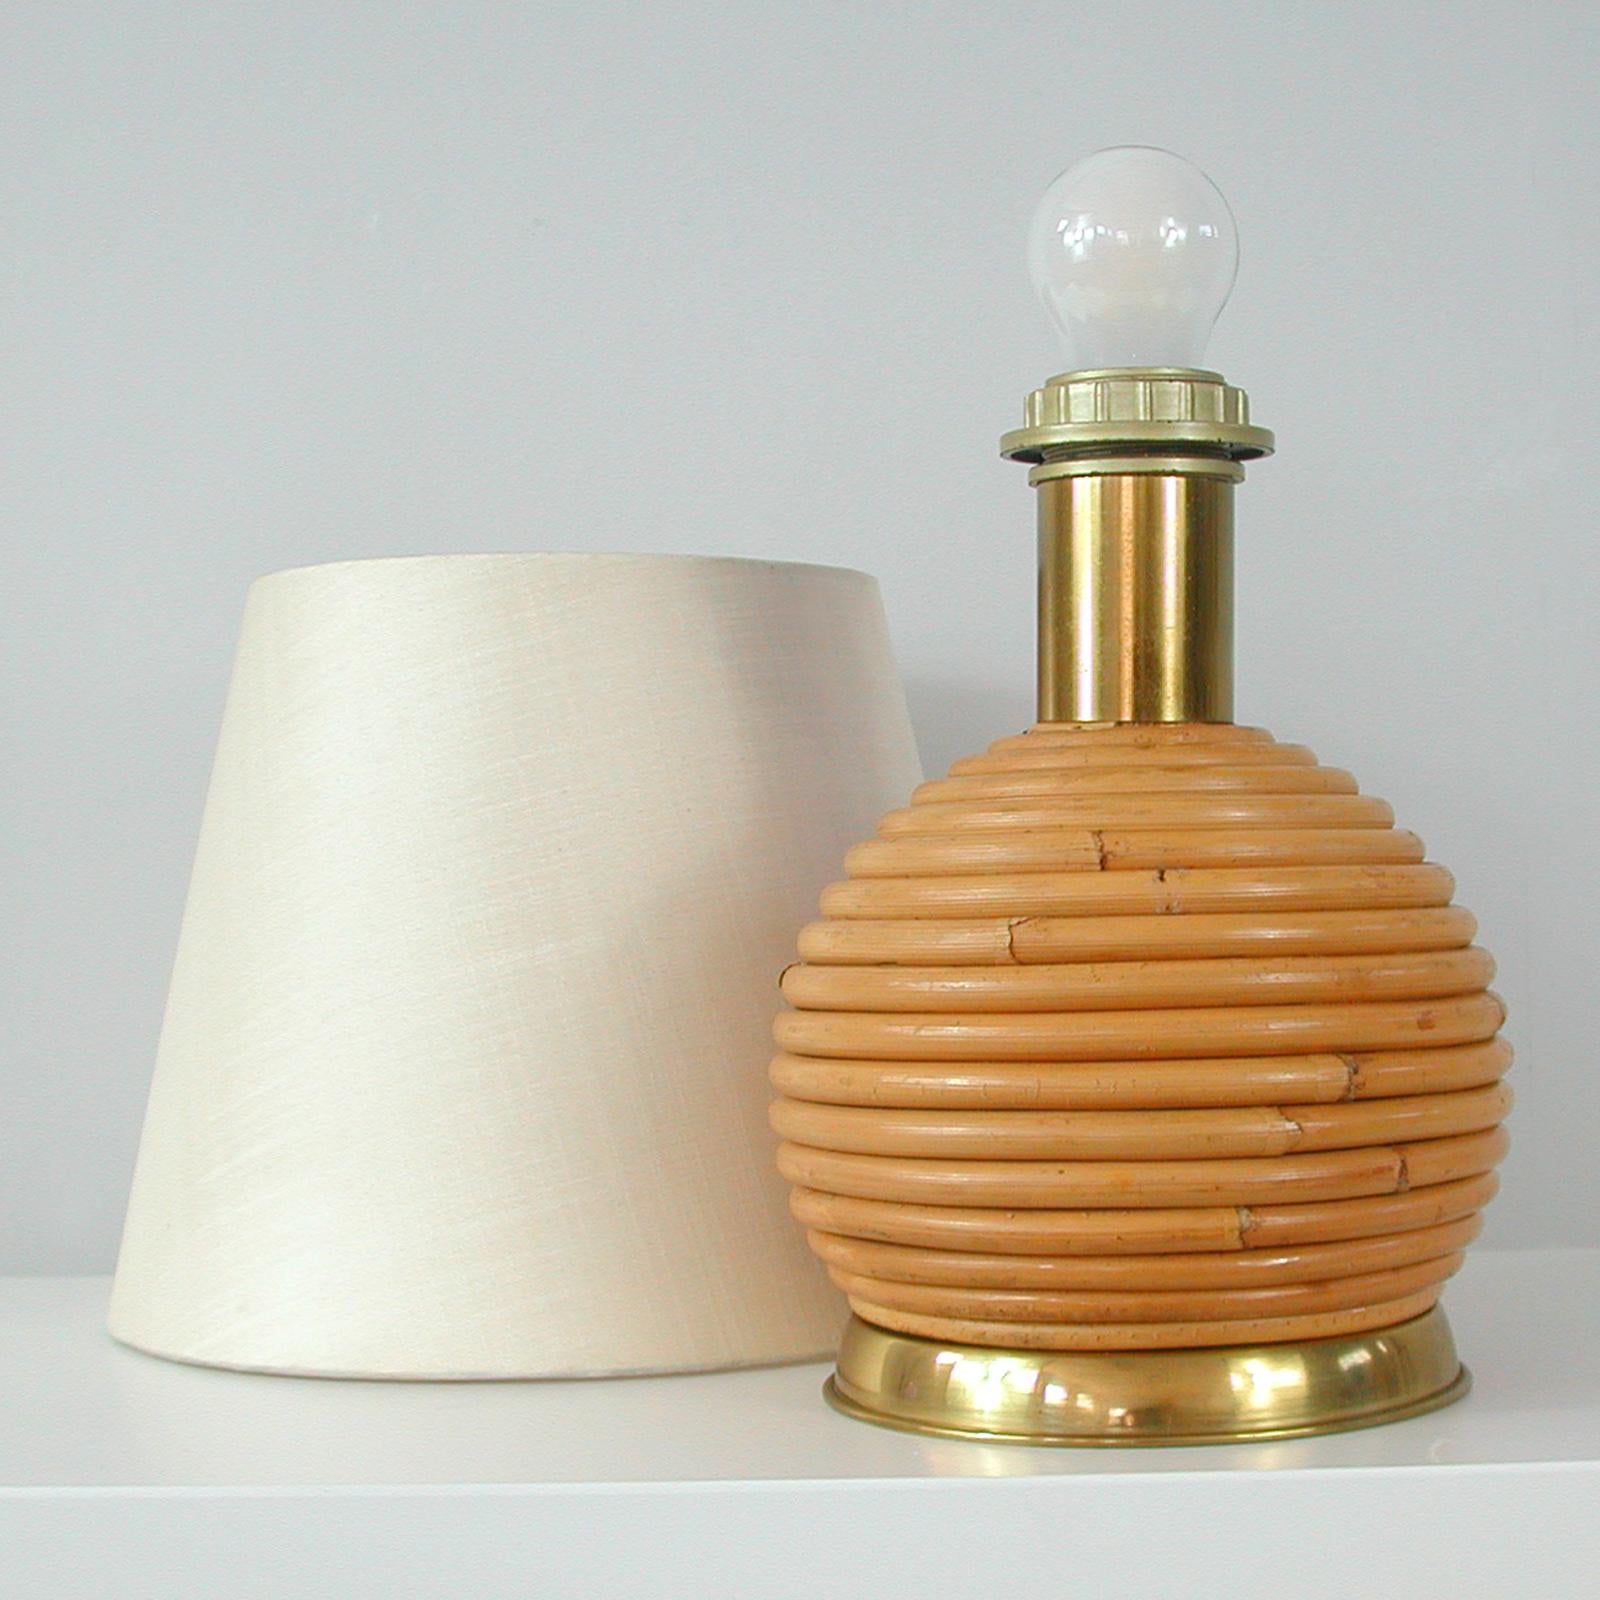 Swedish Midcentury Wicker and Brass Globe Table Lamp, 1960s For Sale 4